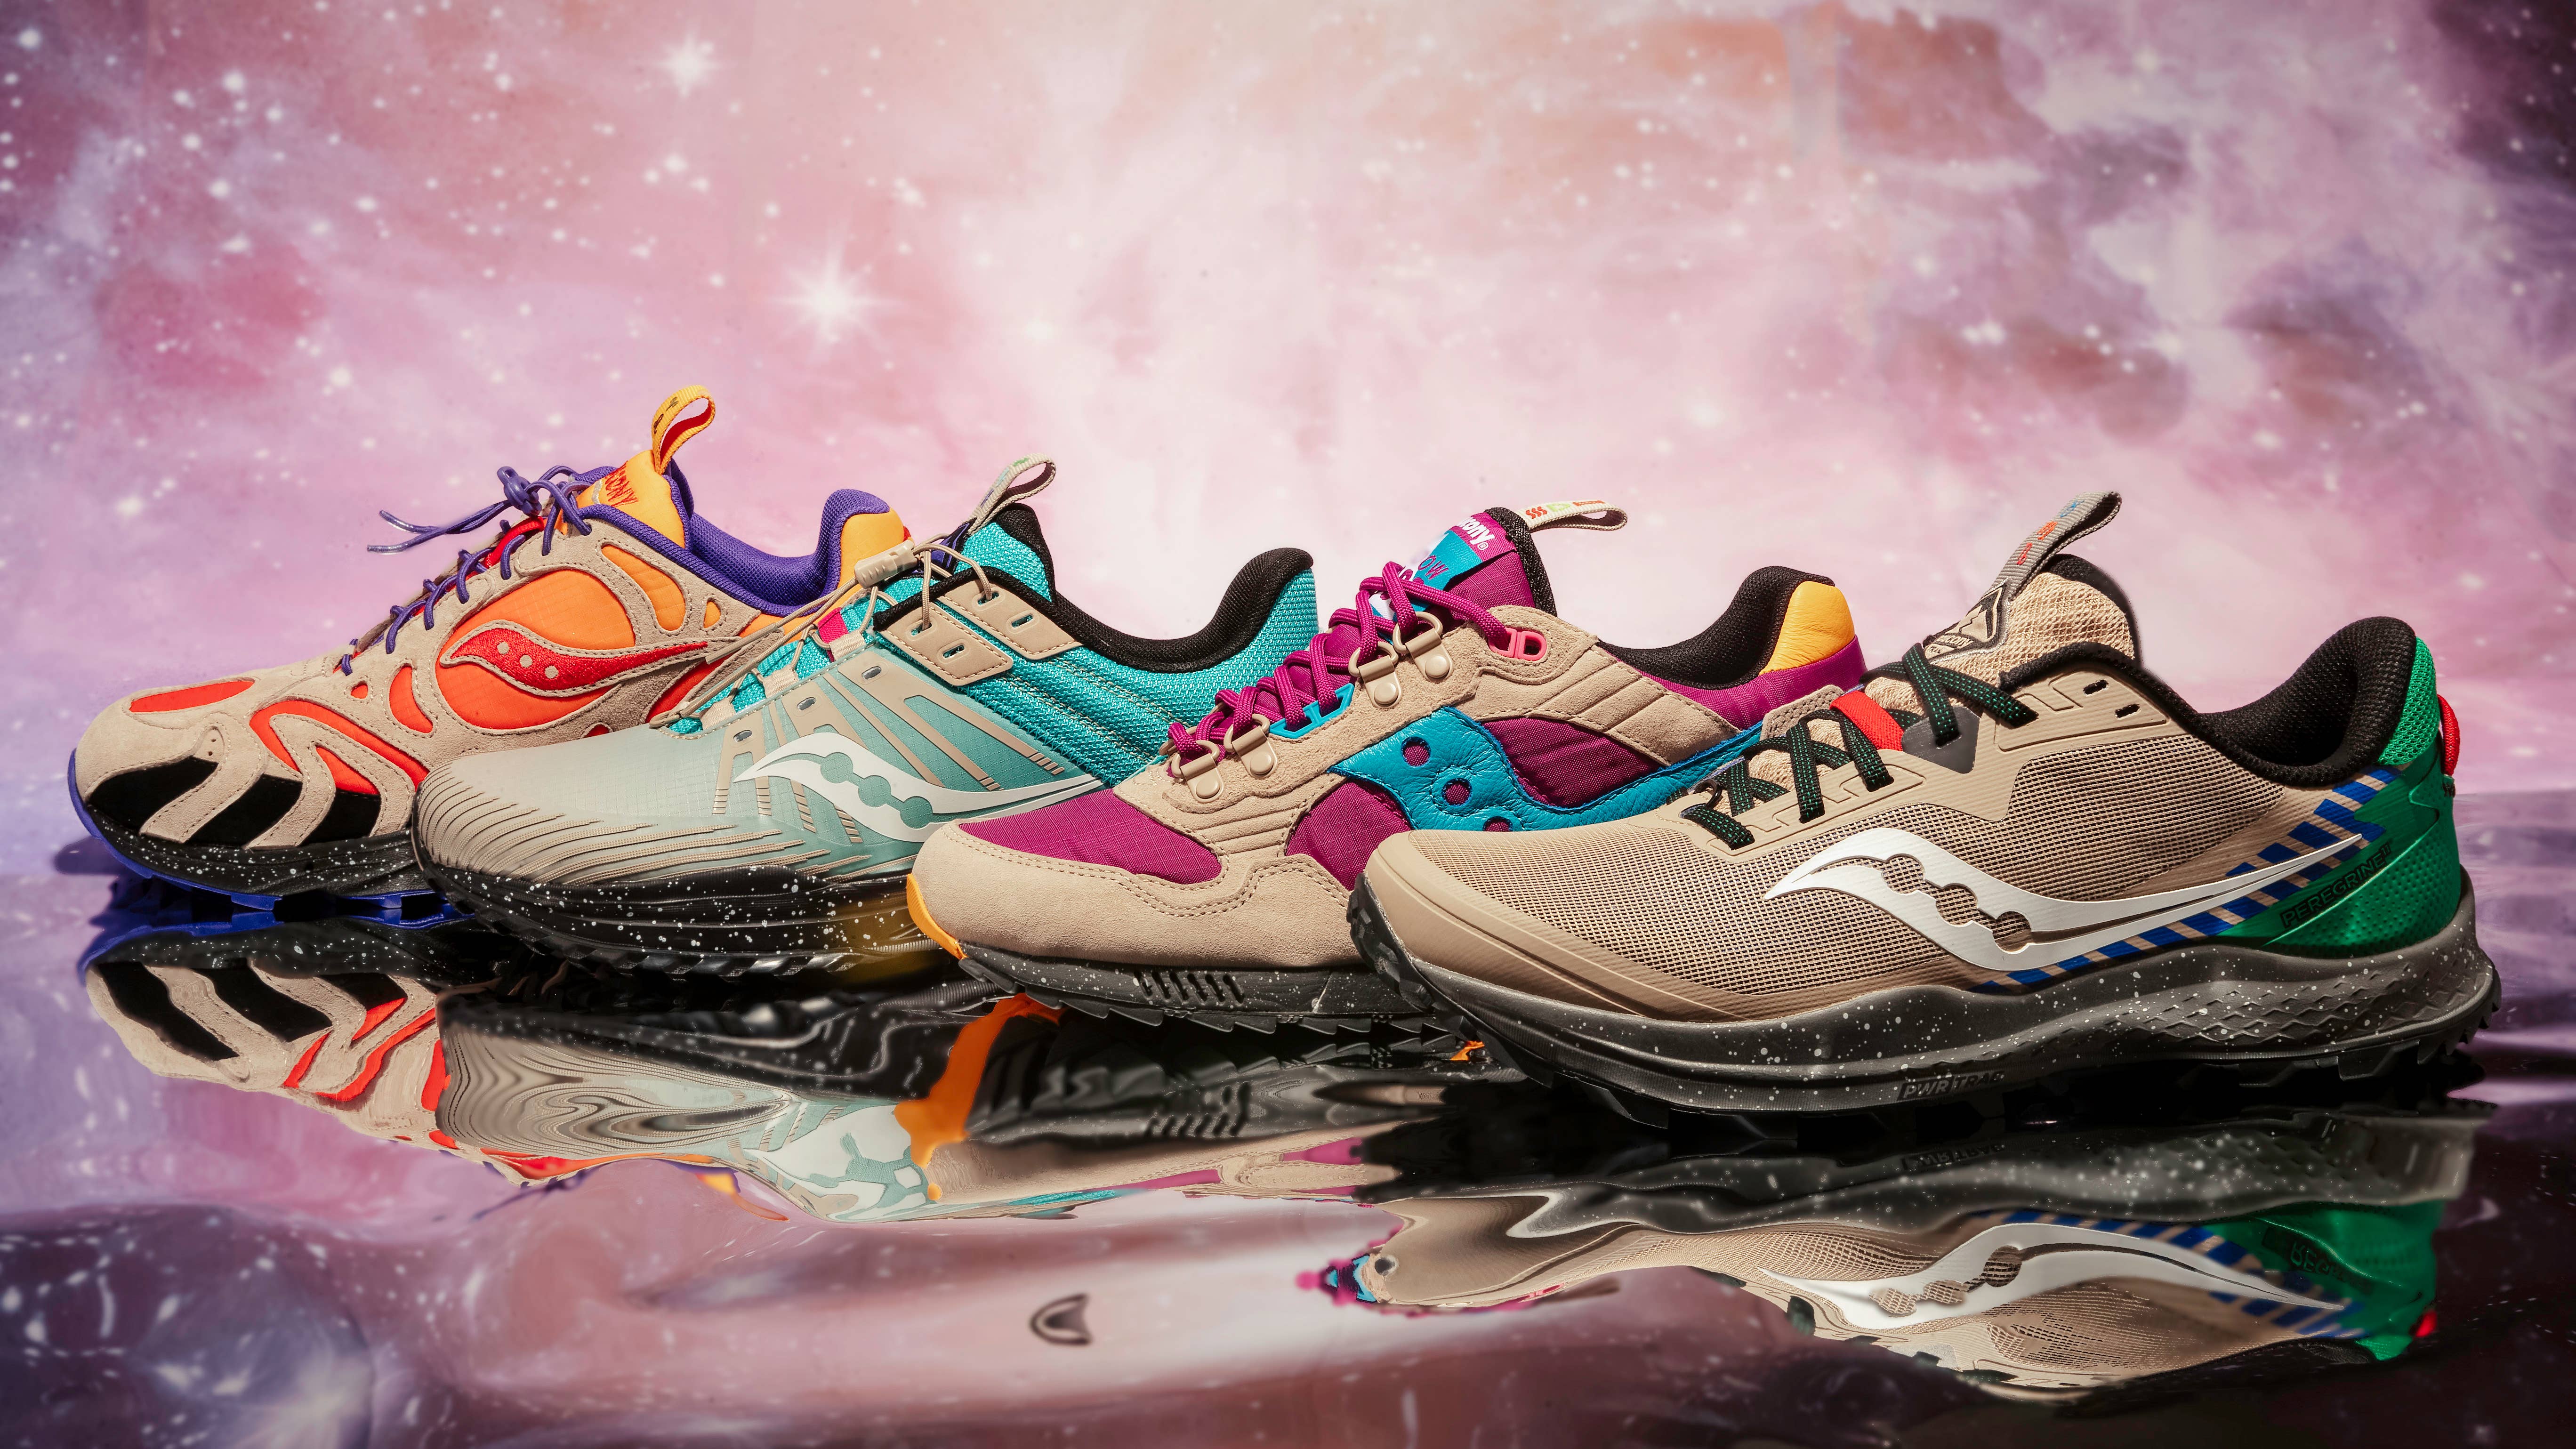 Saucony 'Astrotrail' Pack